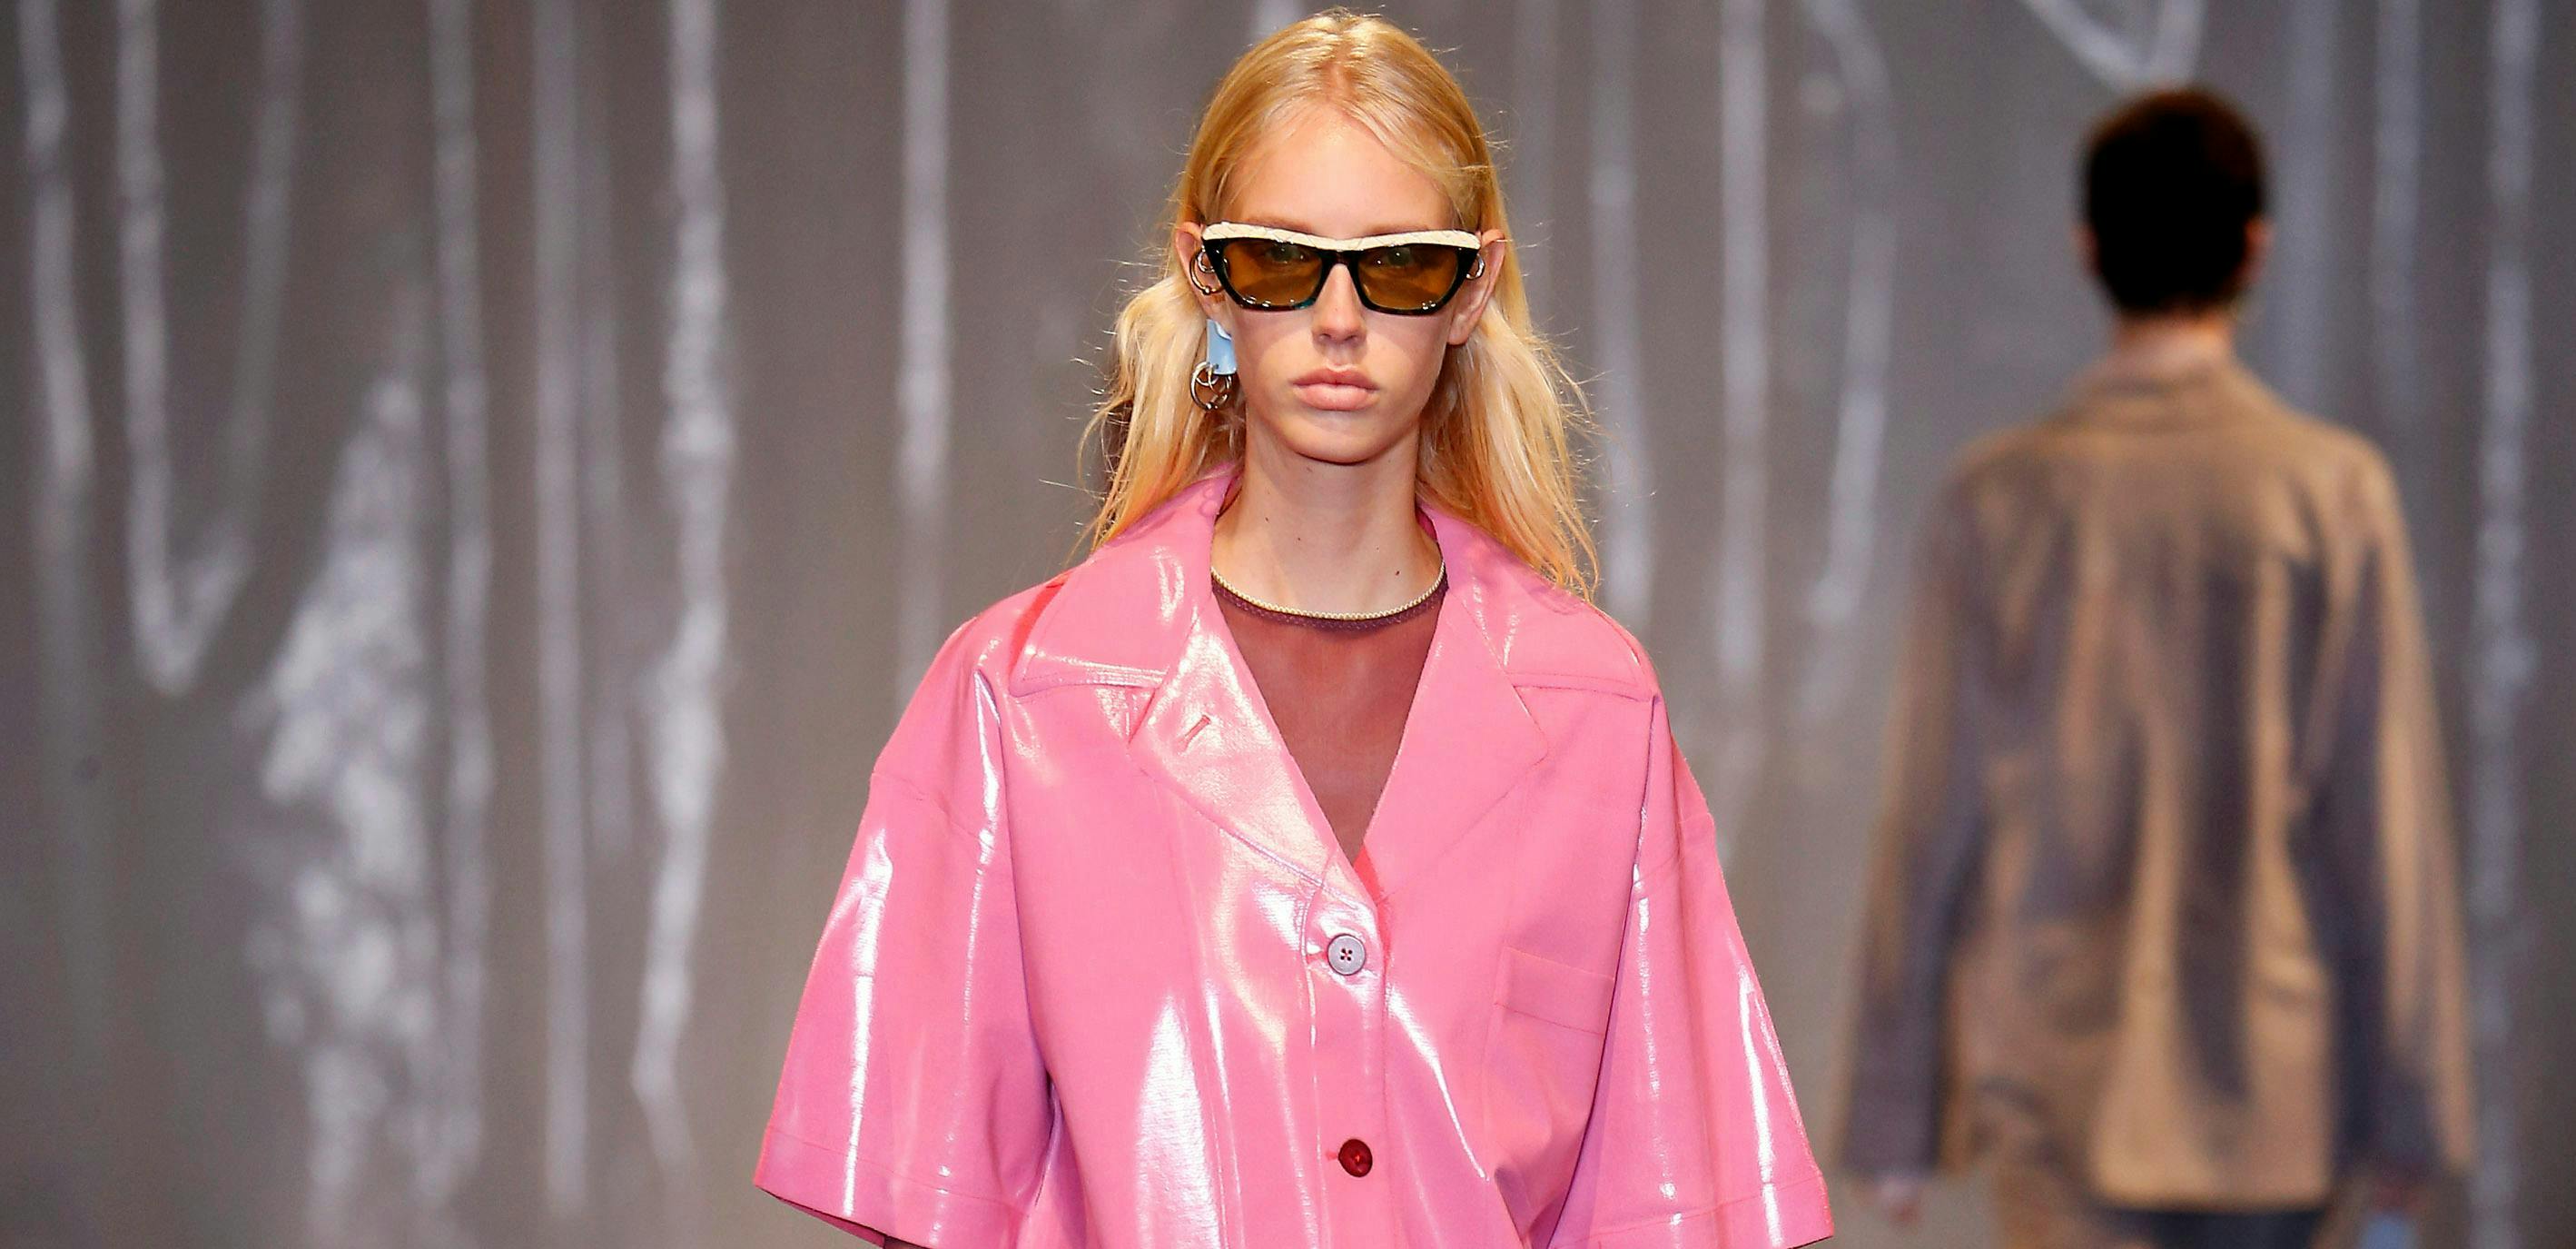 acne ready to wear spring summer 2018 paris fashion week september2017 apparel clothing human person coat accessory accessories sunglasses